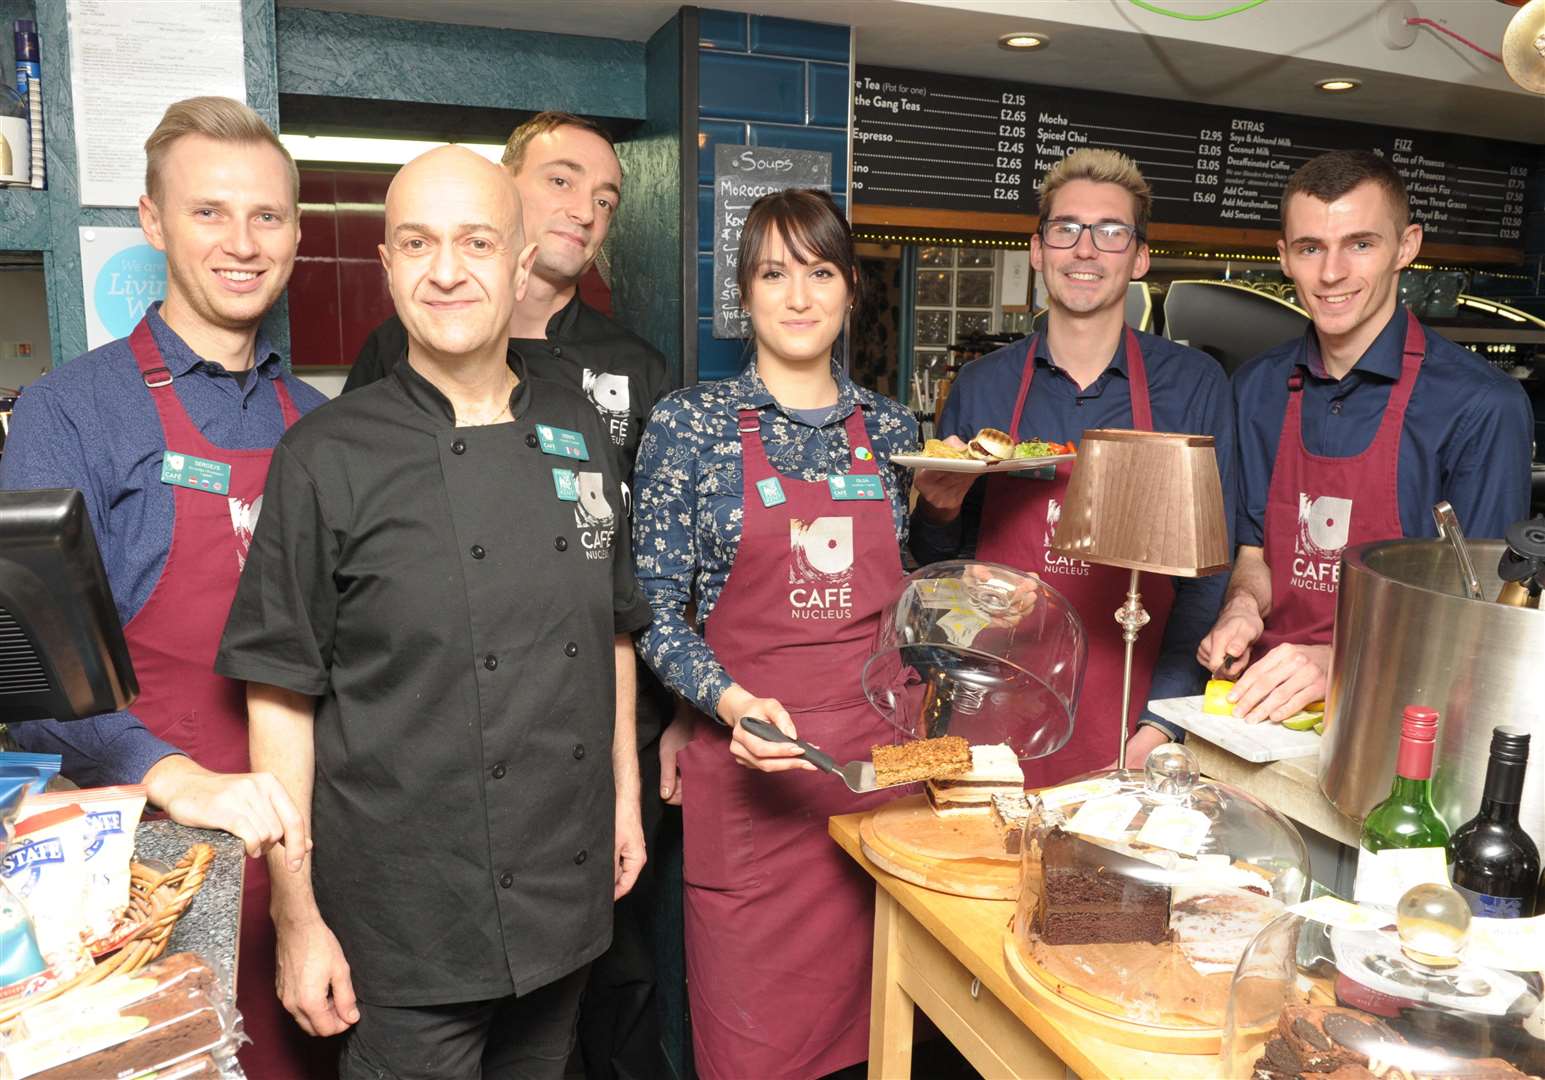 Cafe Nucleus in Chatham is a finalist in Kent Coffee Shop or Tea Room of the Year. Picture: Steve Crispe